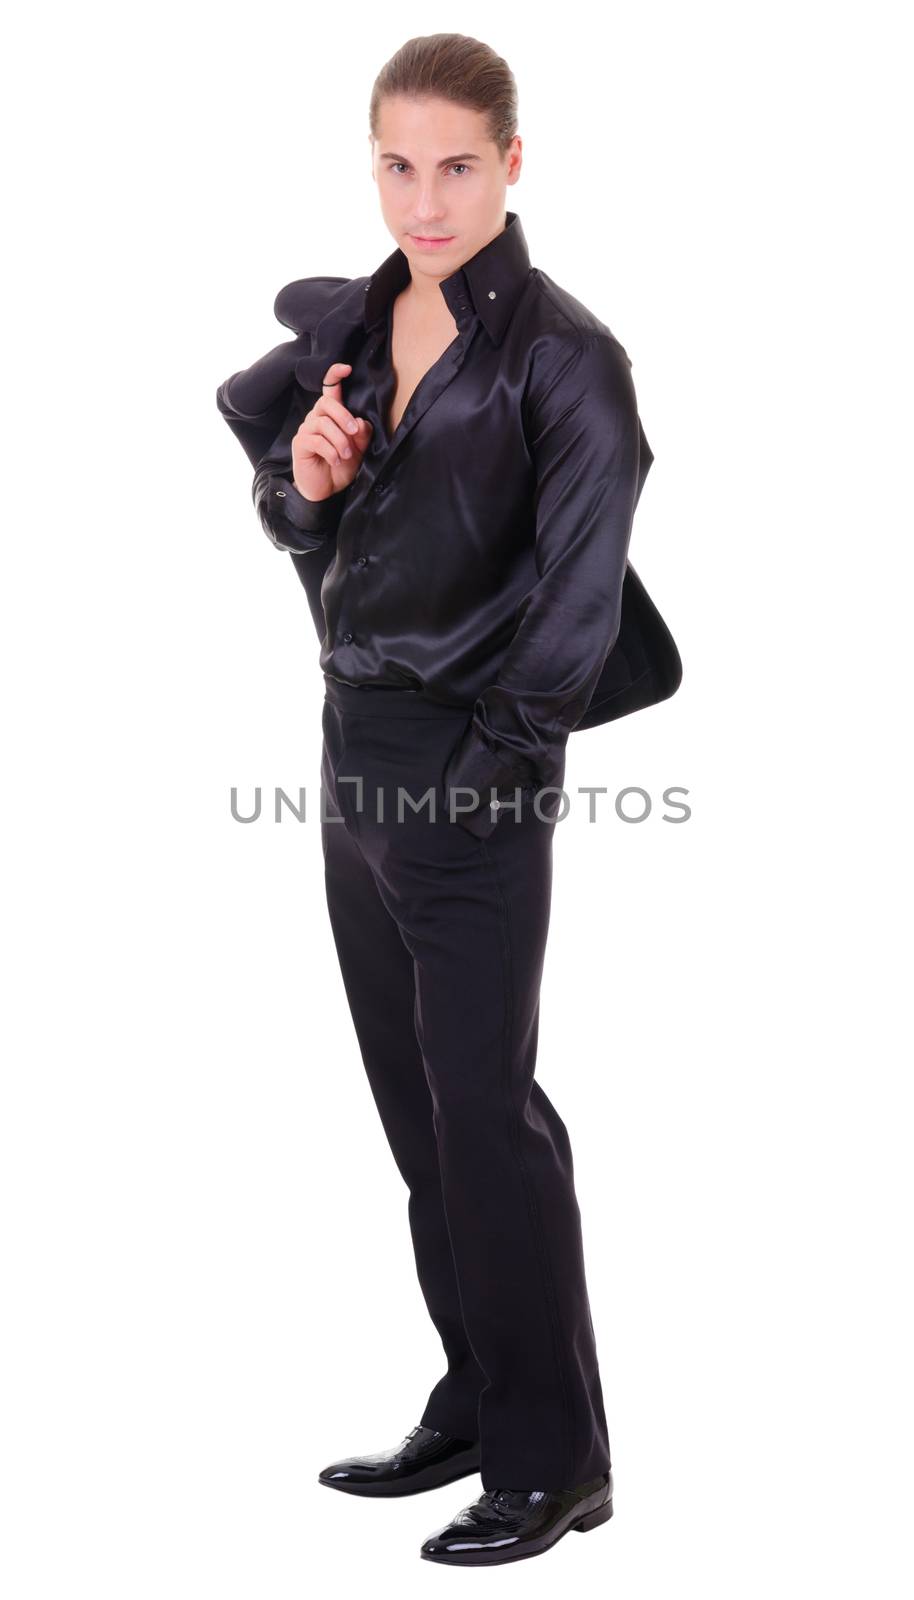 Elegant full-length young man in black suit and shirt derby isolated on white background